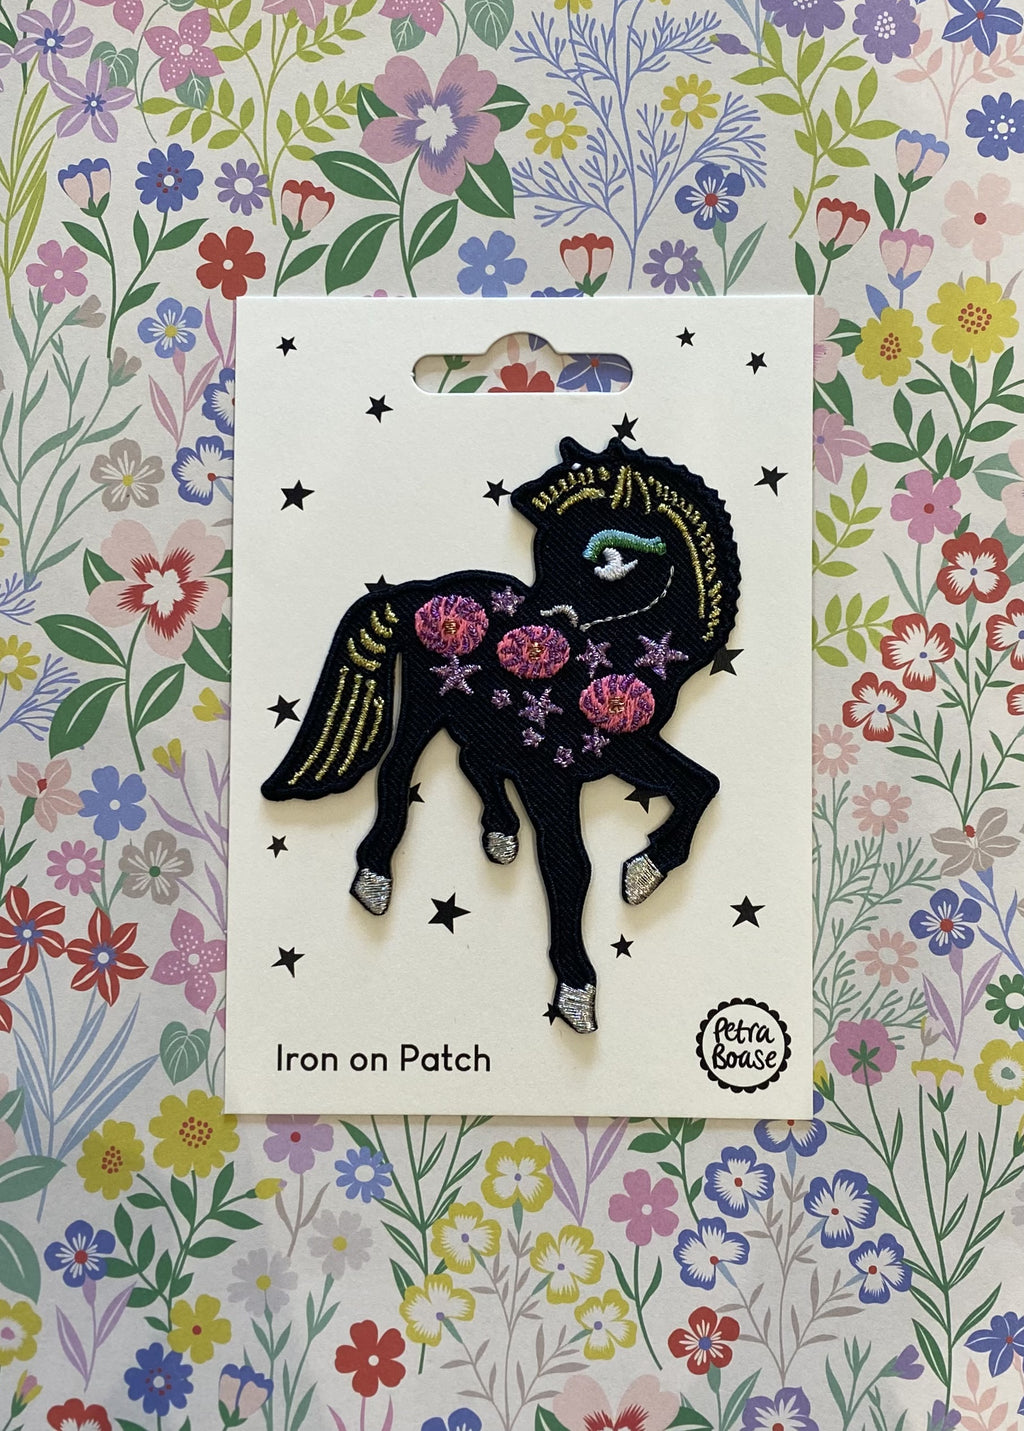 Pony Iron on Patch by Petra Boase